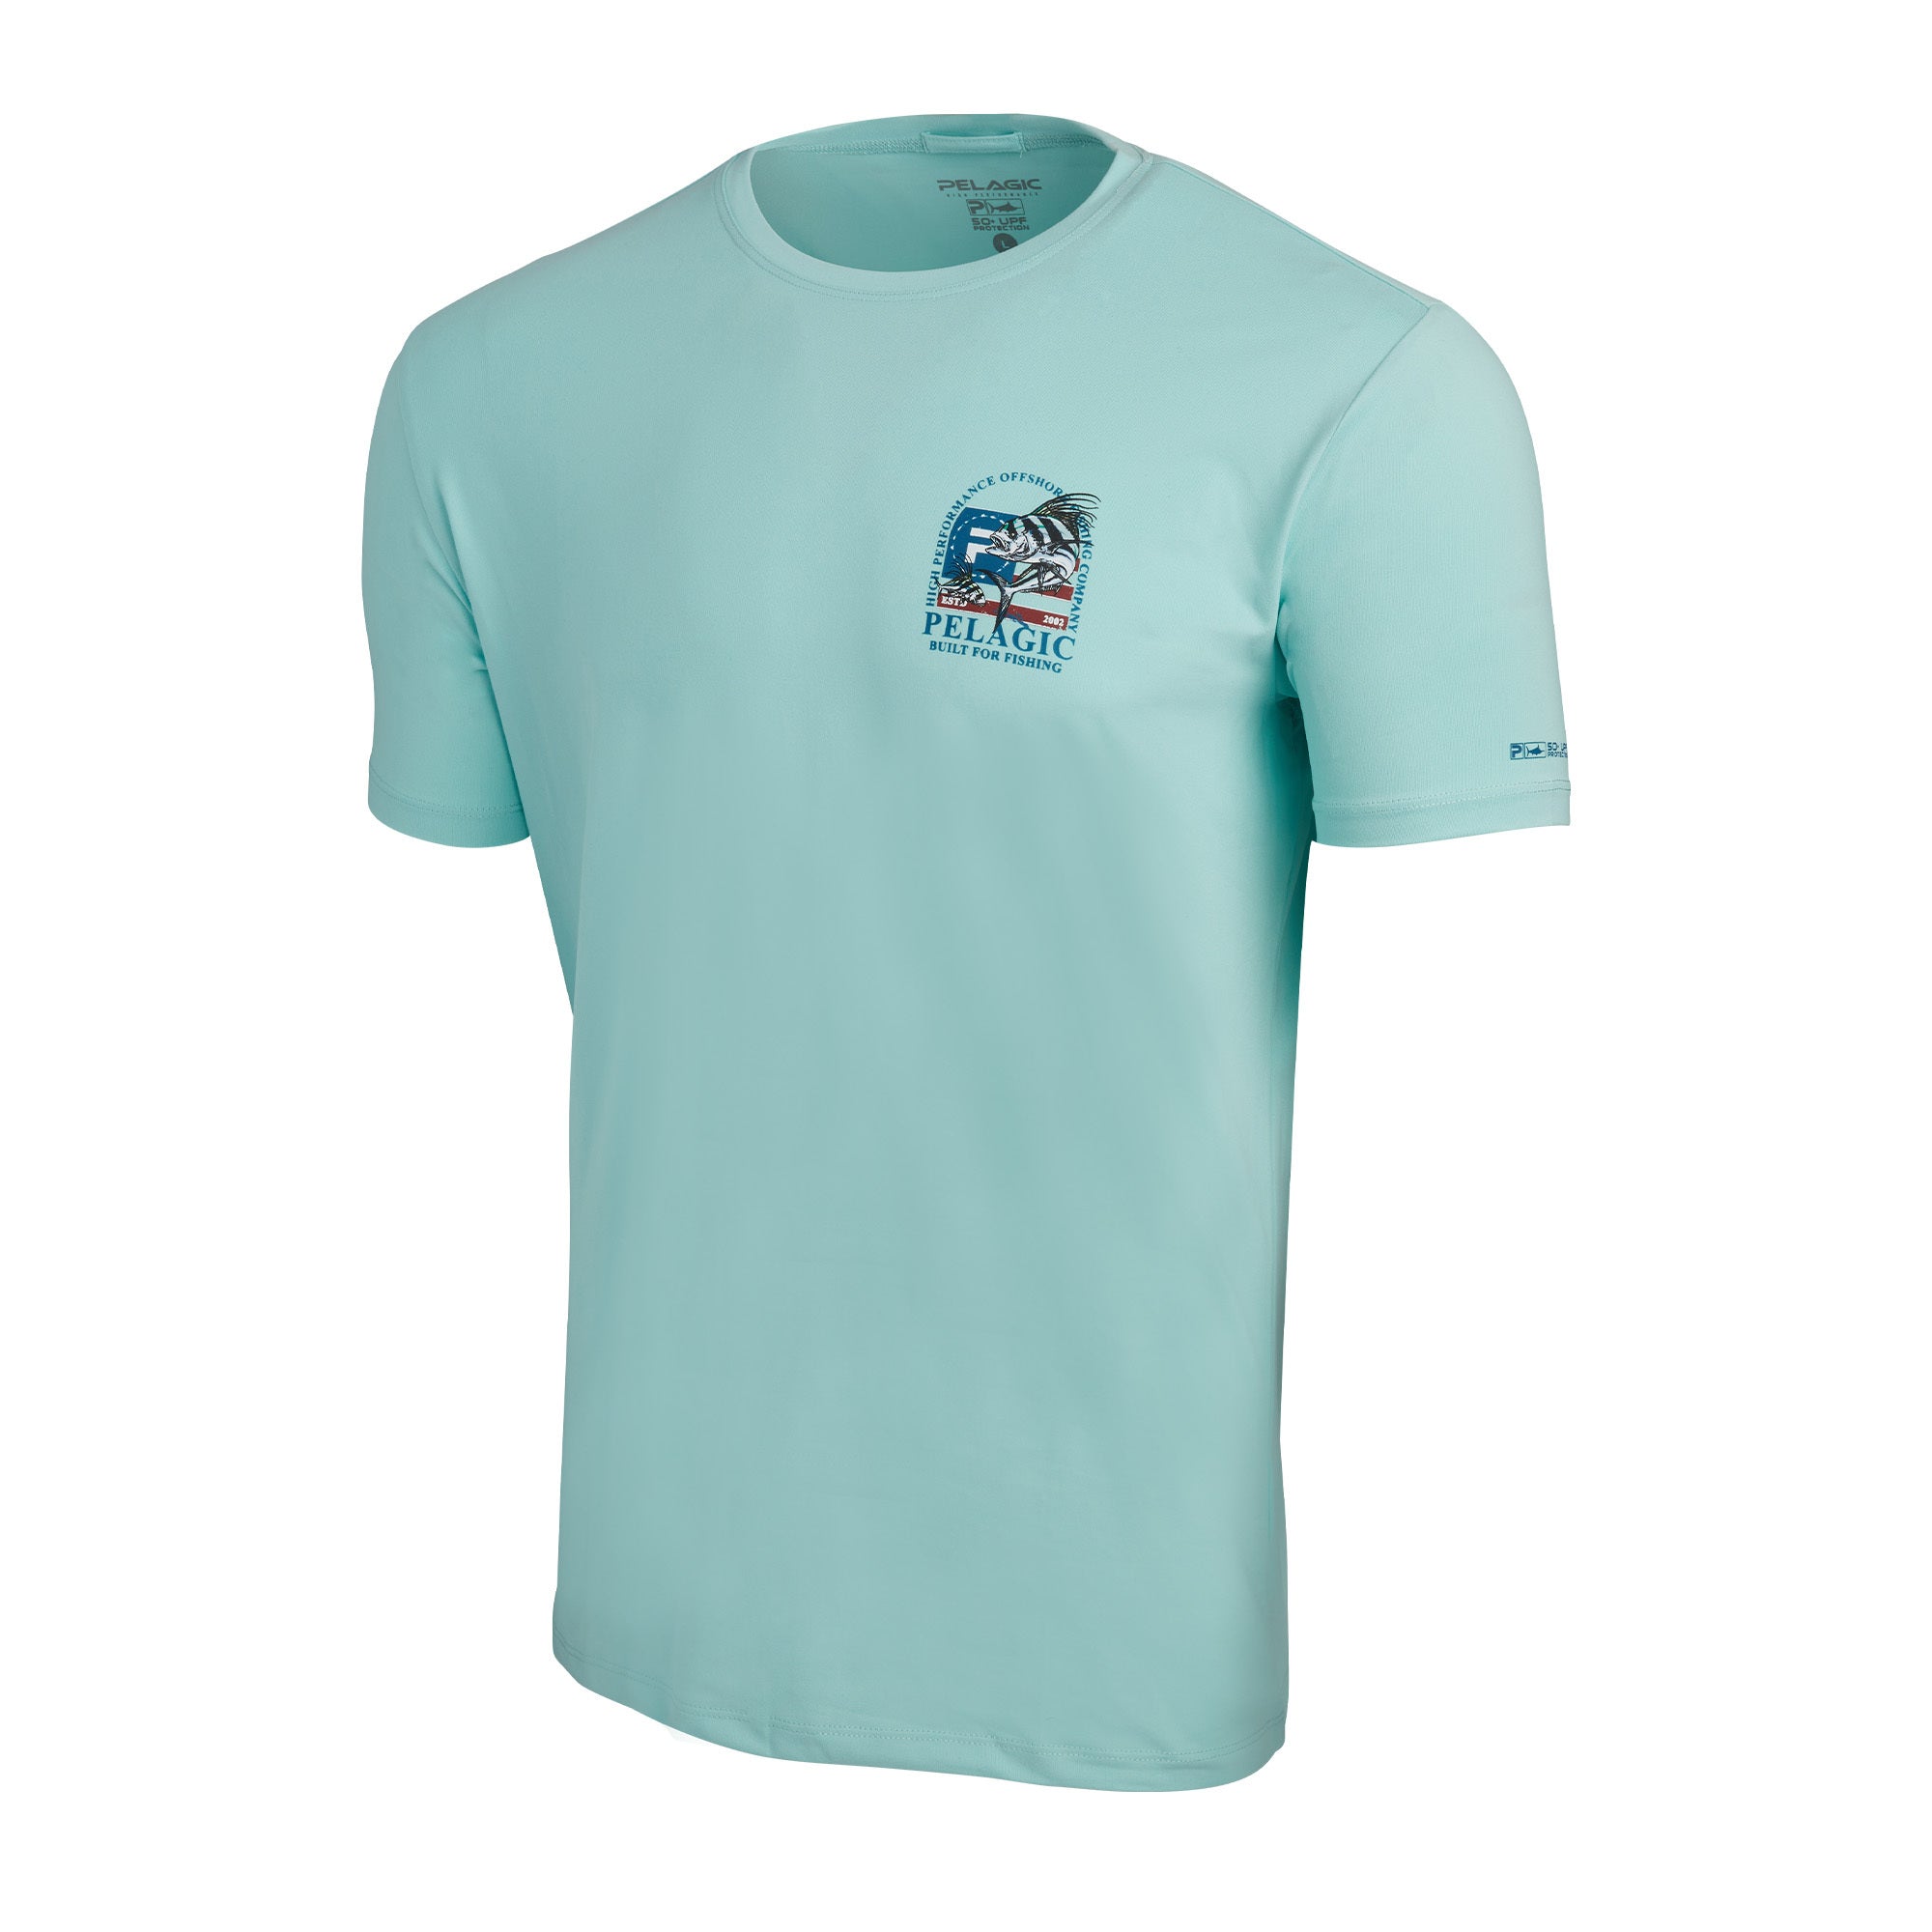 Stratos Patriot Rooster Performance Shirt